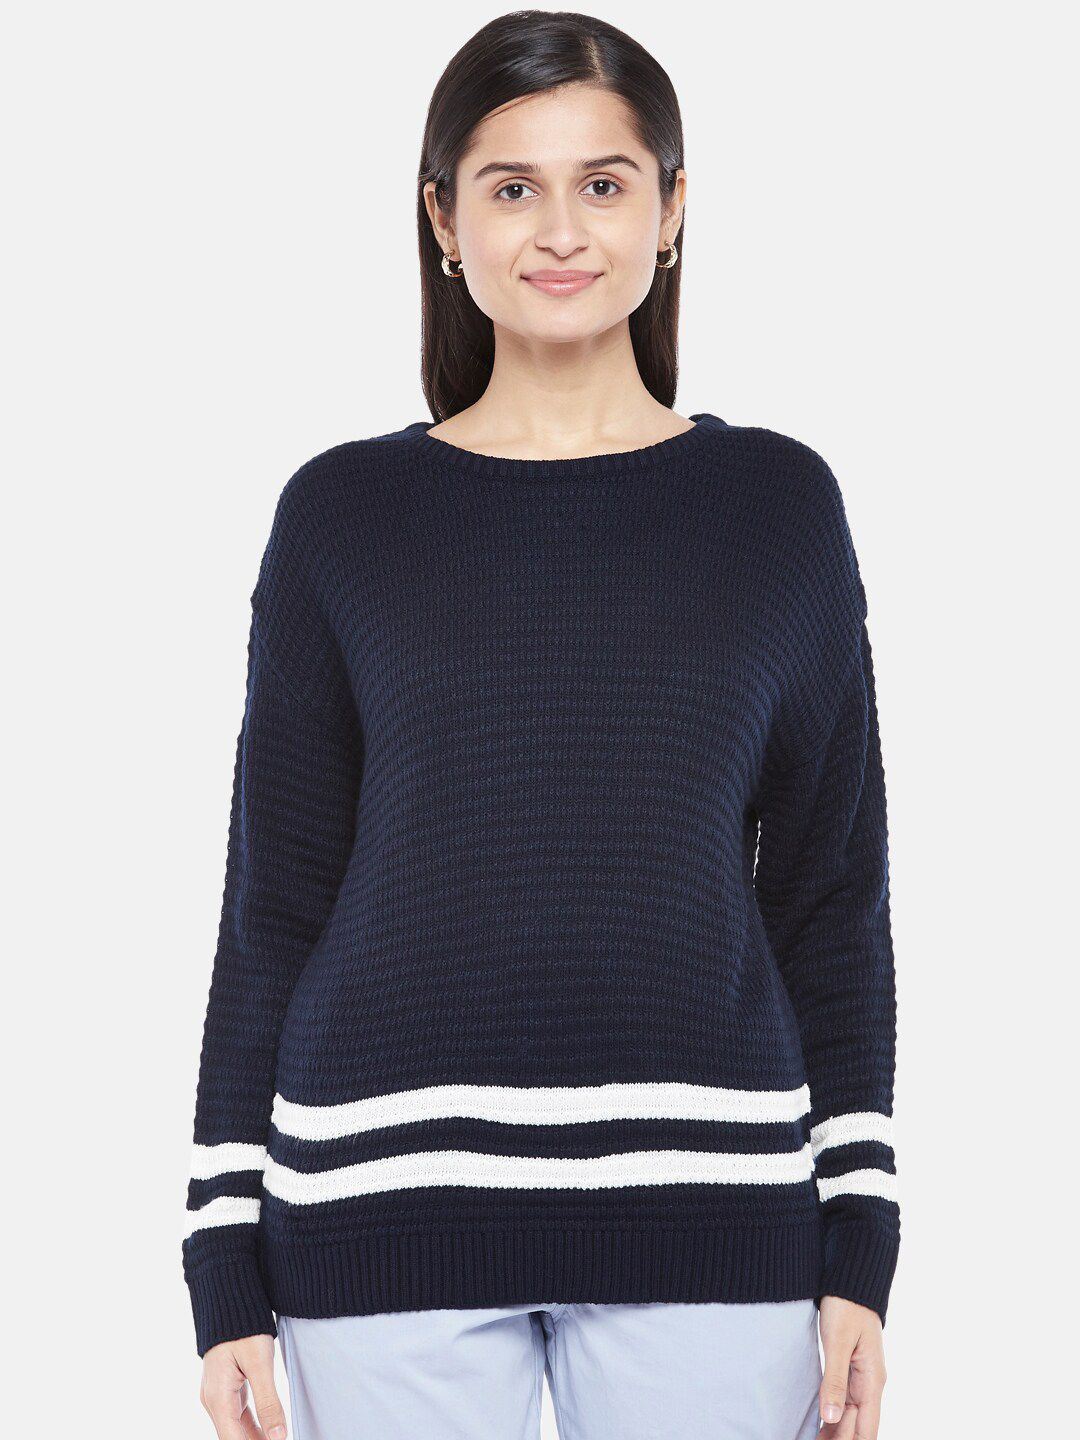 Honey by Pantaloons Women Navy Blue & White Pure Acrylic Pullover Sweater Price in India